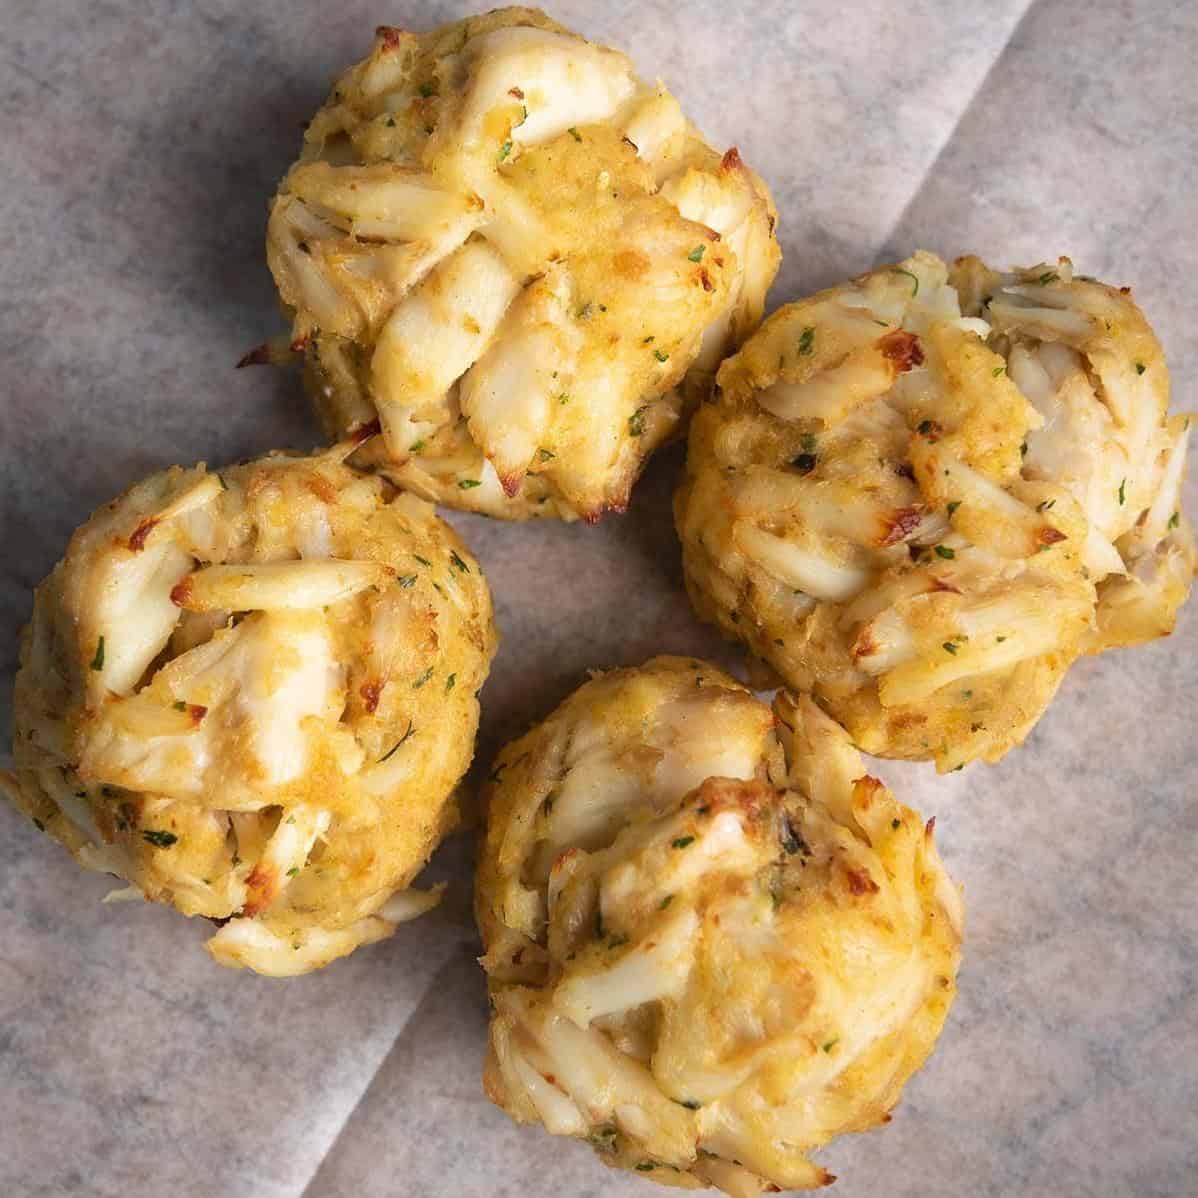  Serve these crab cakes as an appetizer at your next dinner party and watch them disappear fast